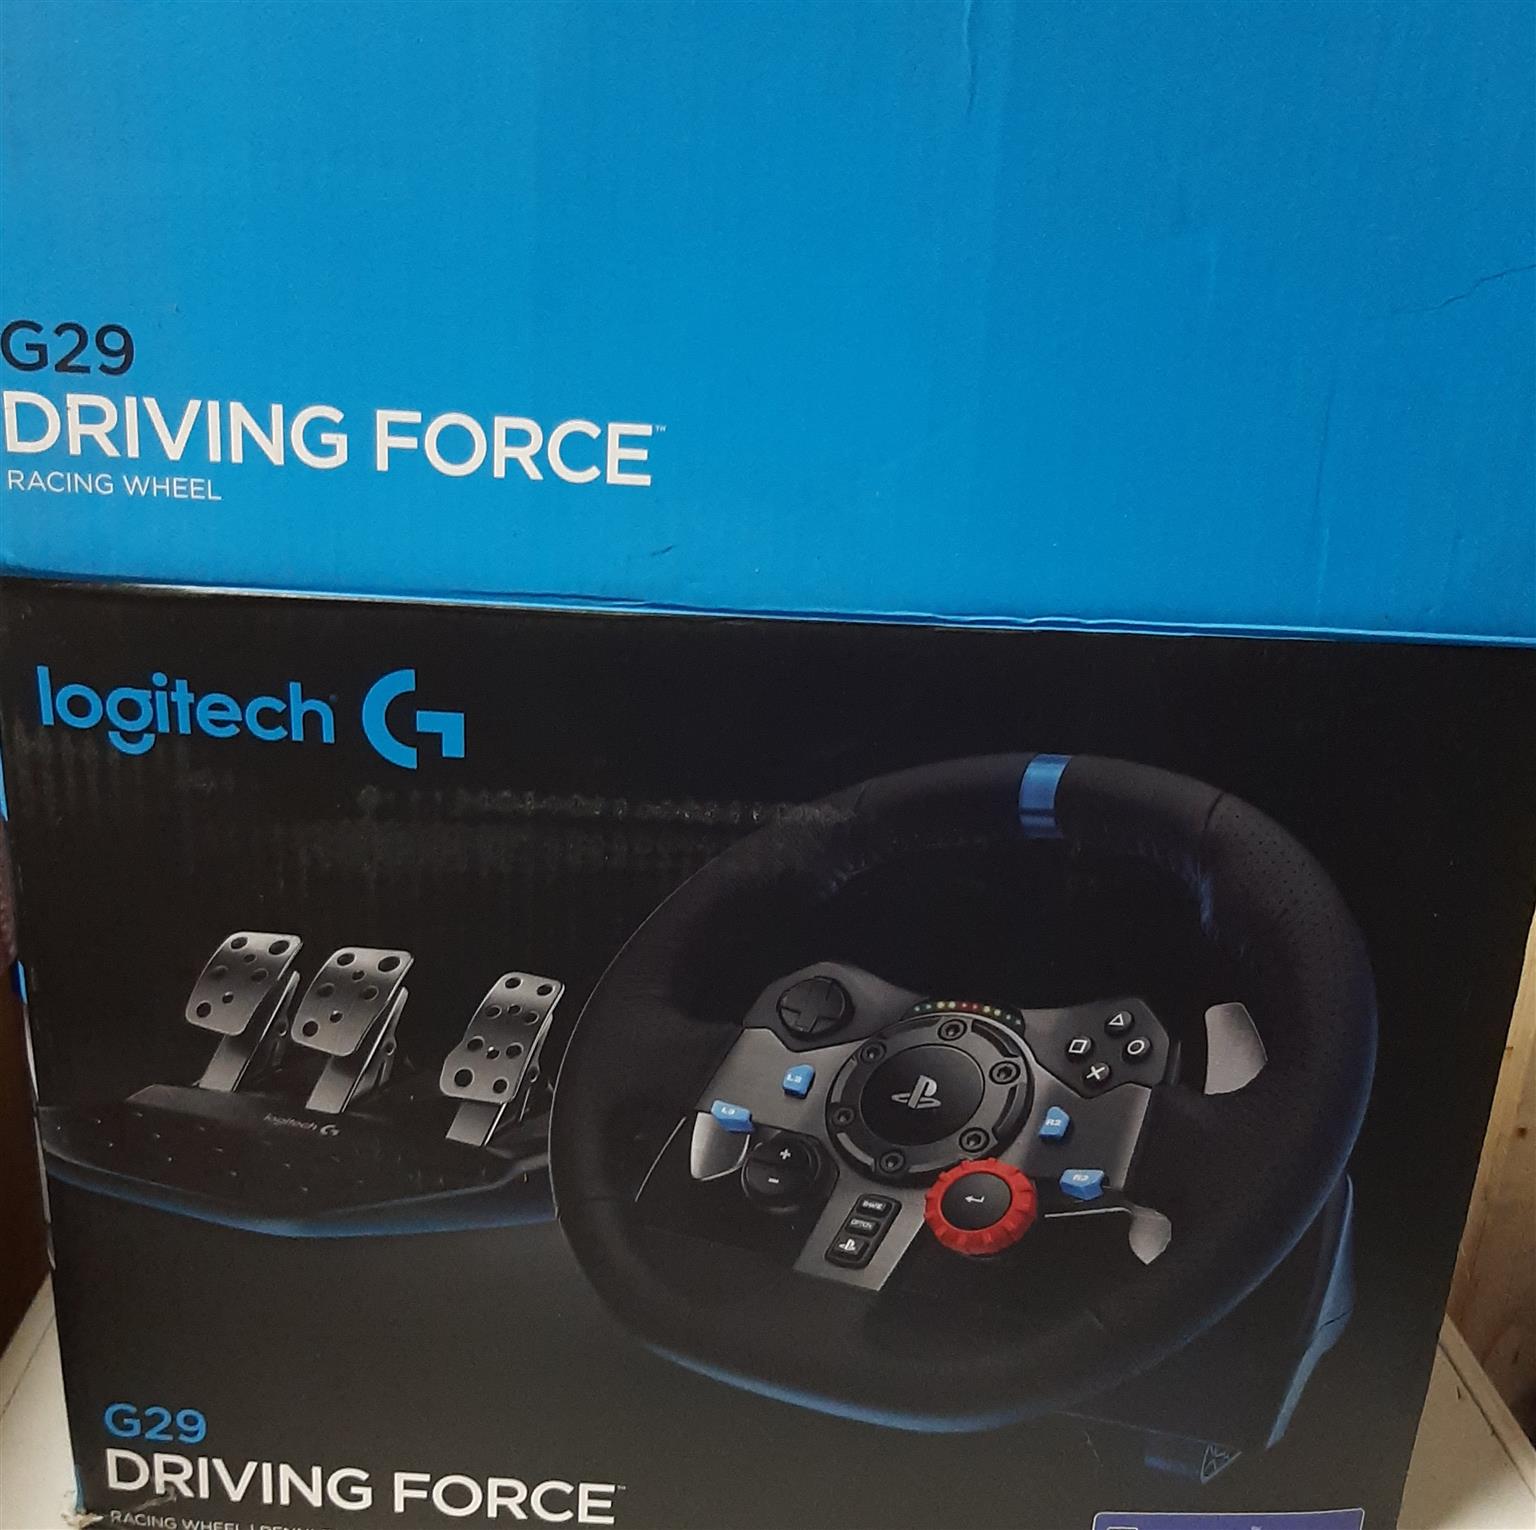 LOGITECH G29 steering wheel with pedals, gear shifter, and accessories